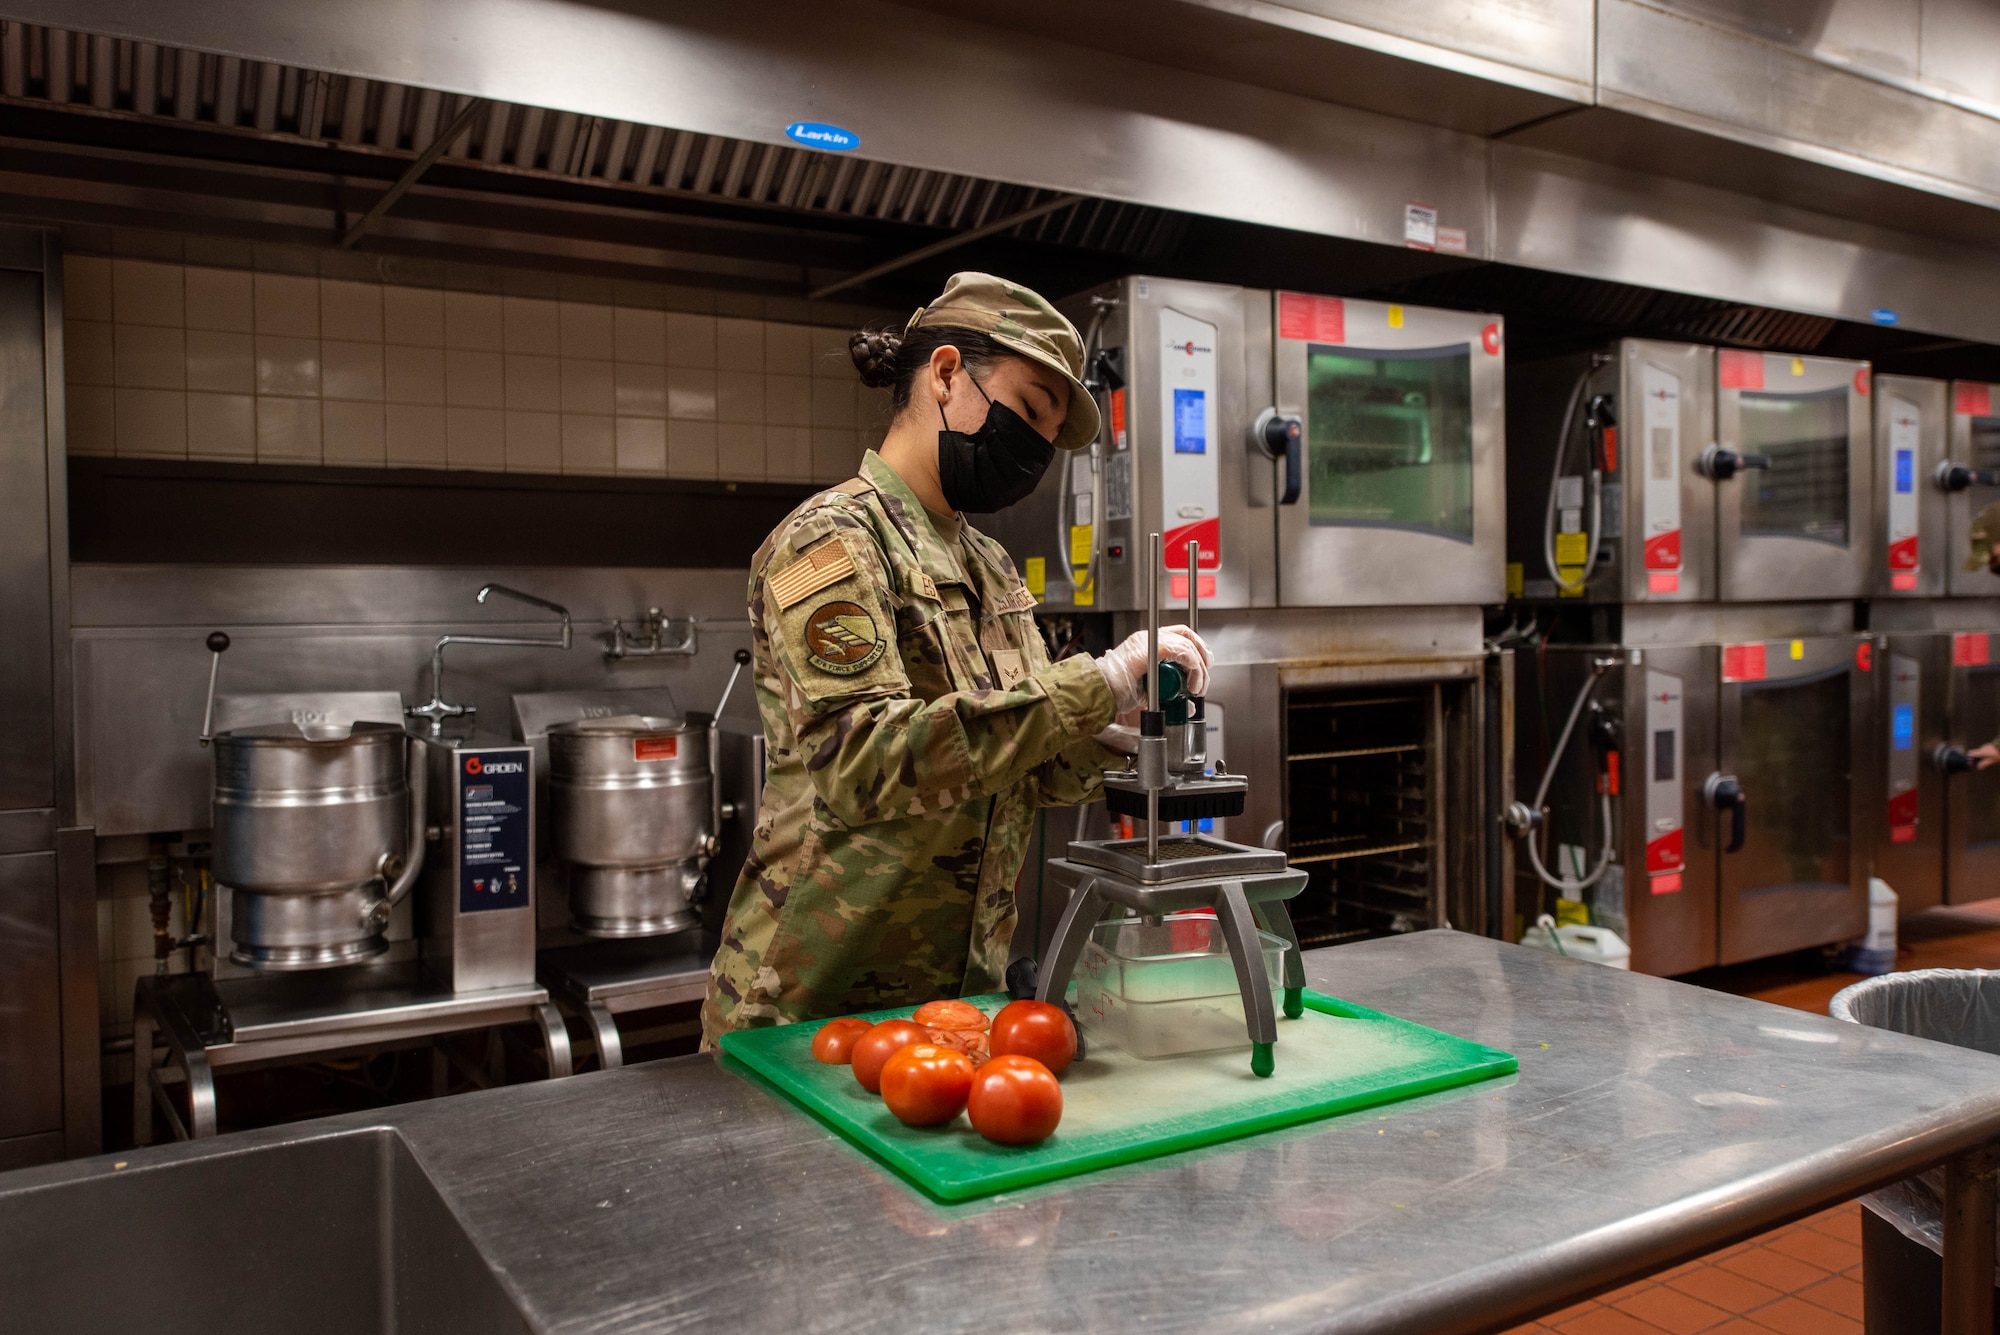 Airman in kitchen chopping tomatoes.